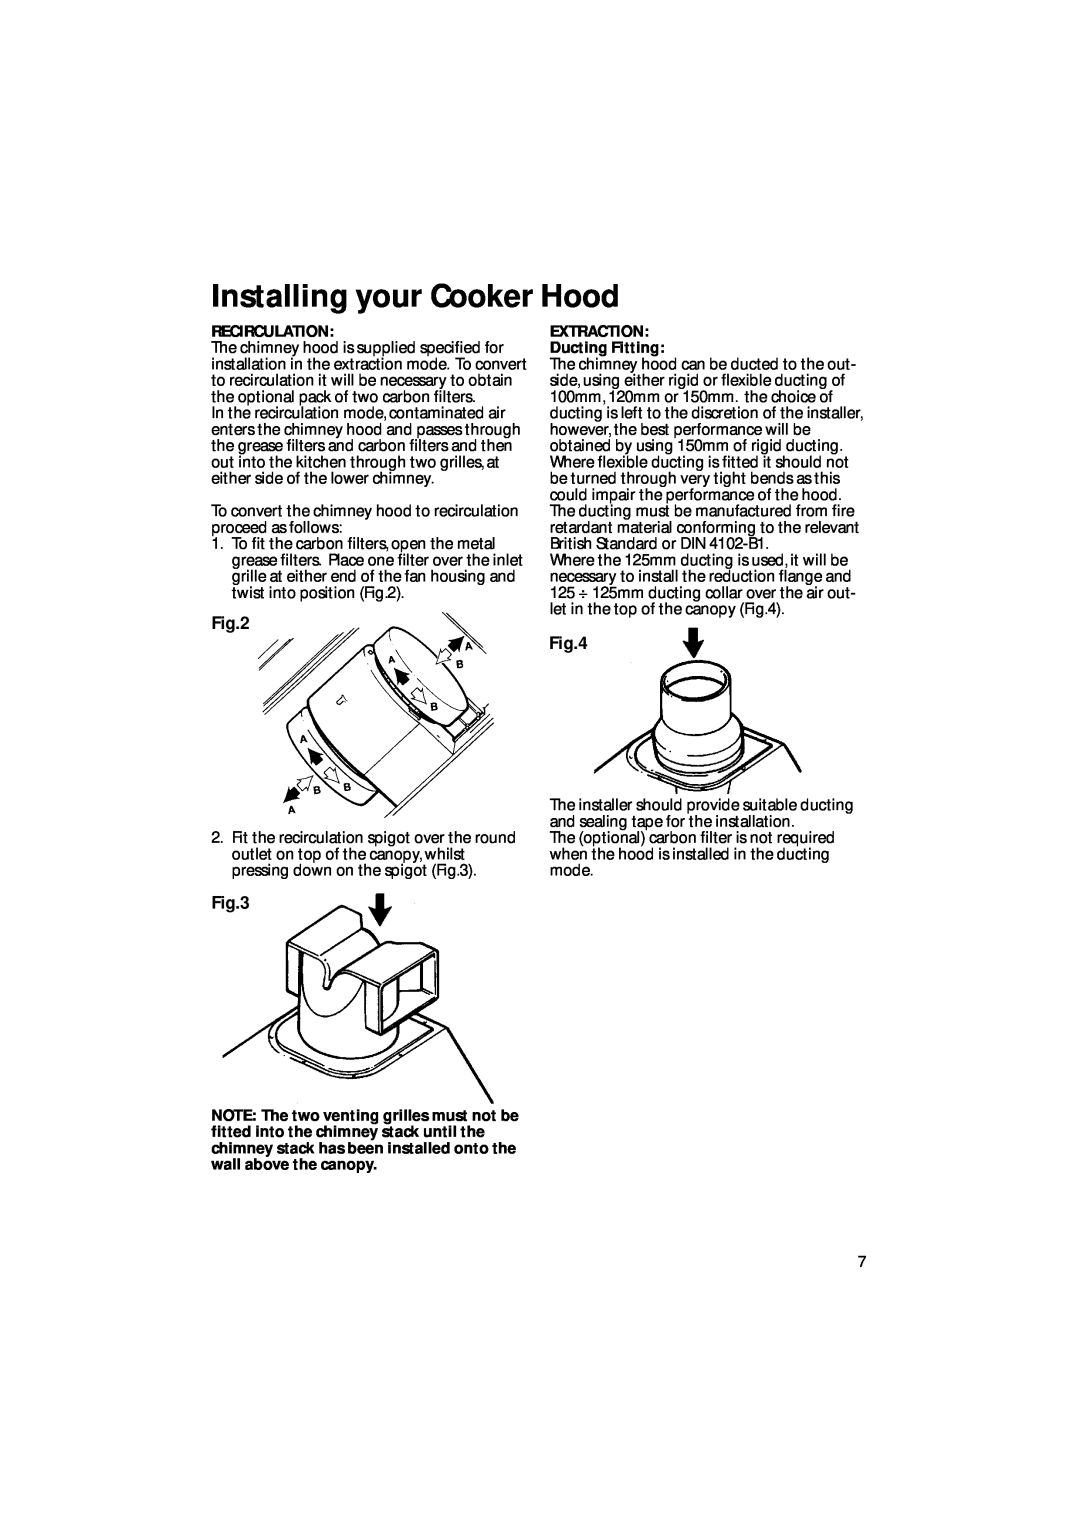 Creda CRC65, CRC90 manual Installing your Cooker Hood, Recirculation, EXTRACTION Ducting Fitting 